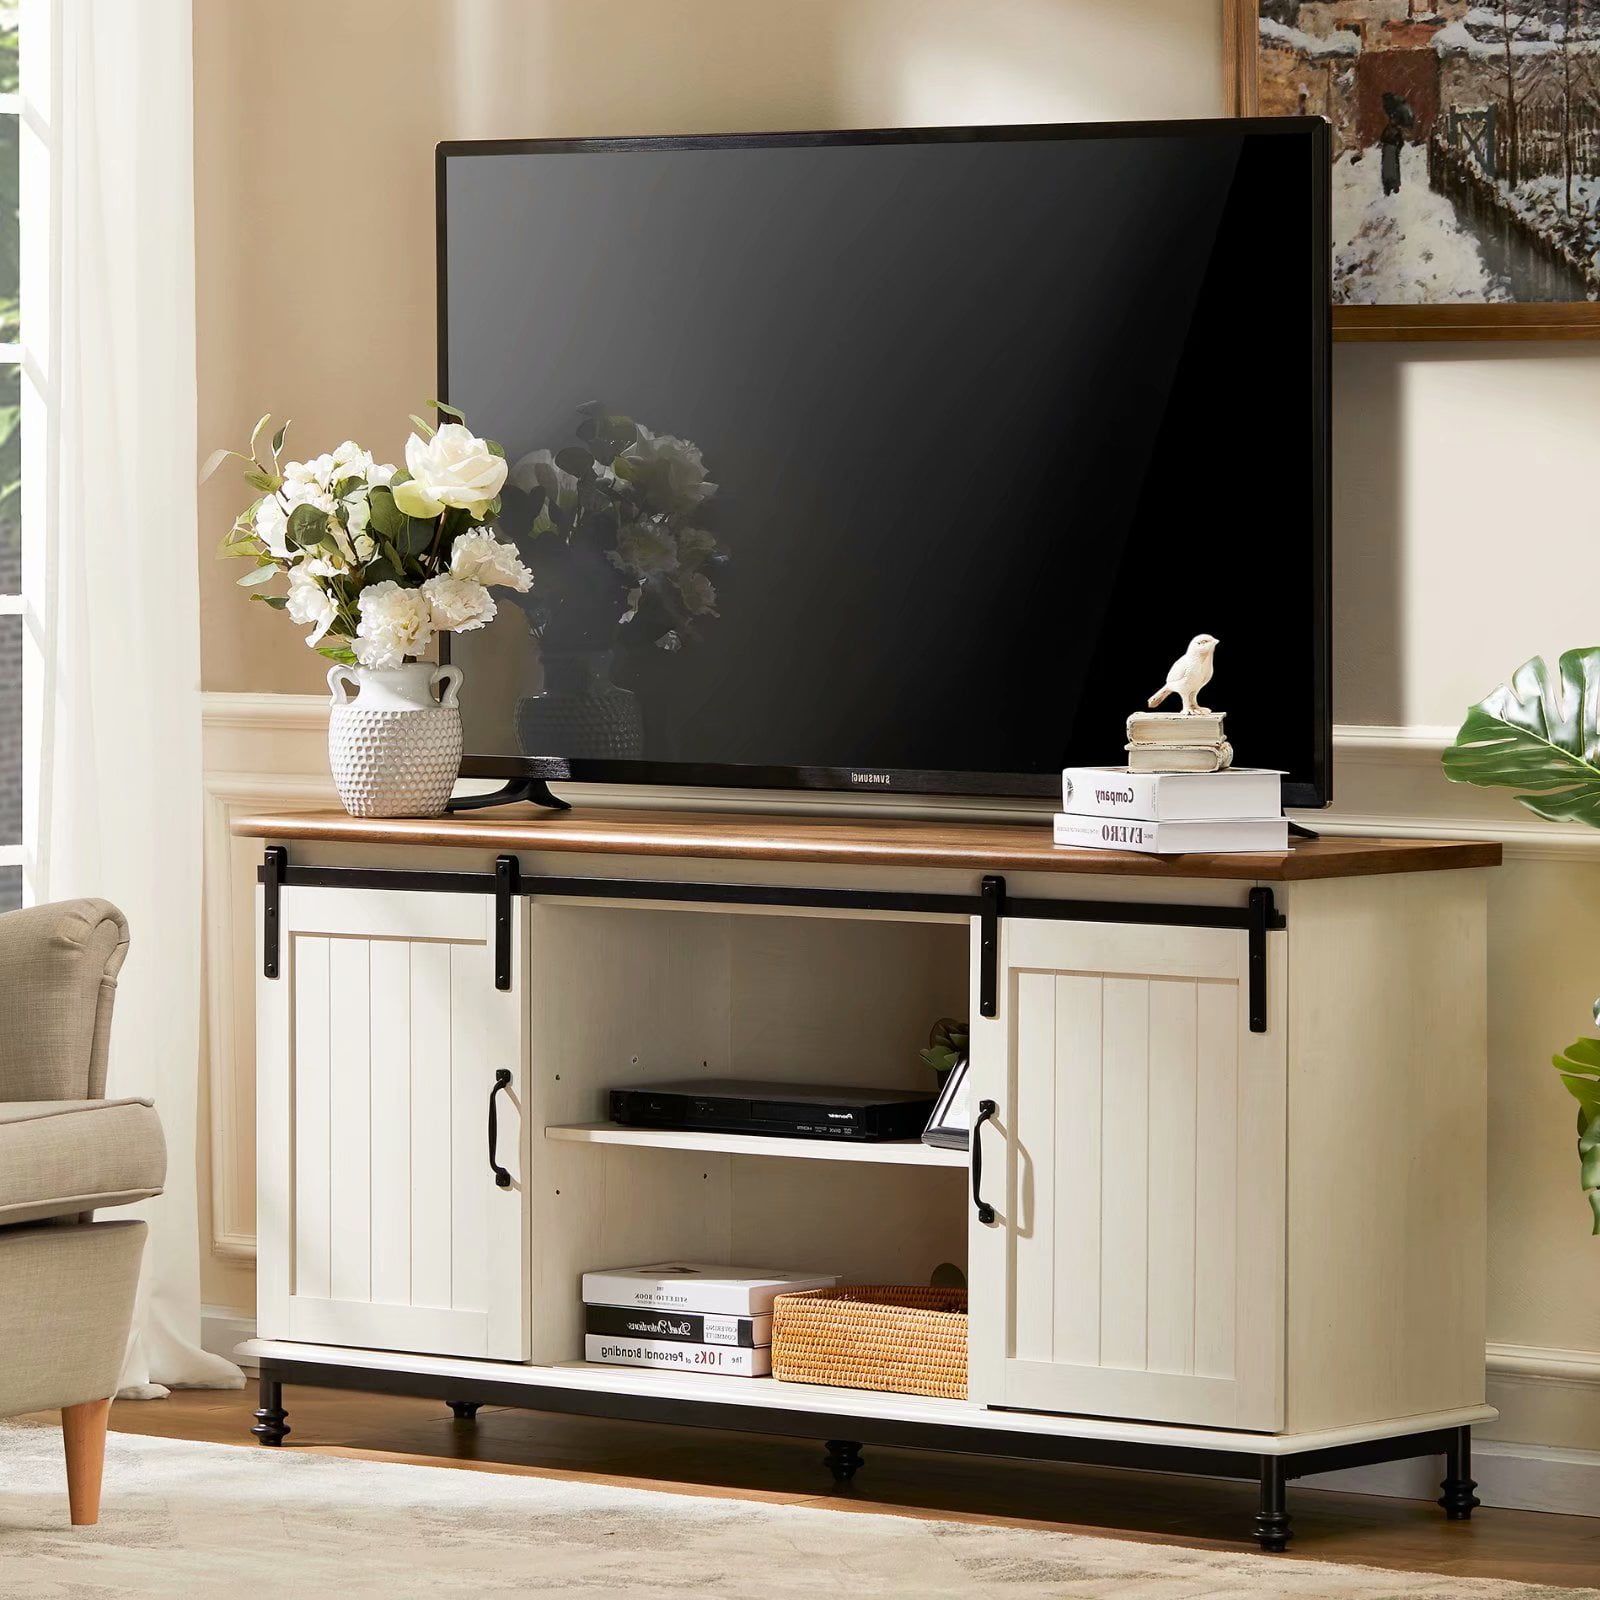 Buy Wampat Farmhouse Tv Stand Sliding Barn Door Entertainment Center In Farmhouse Stands For Tvs (View 13 of 20)